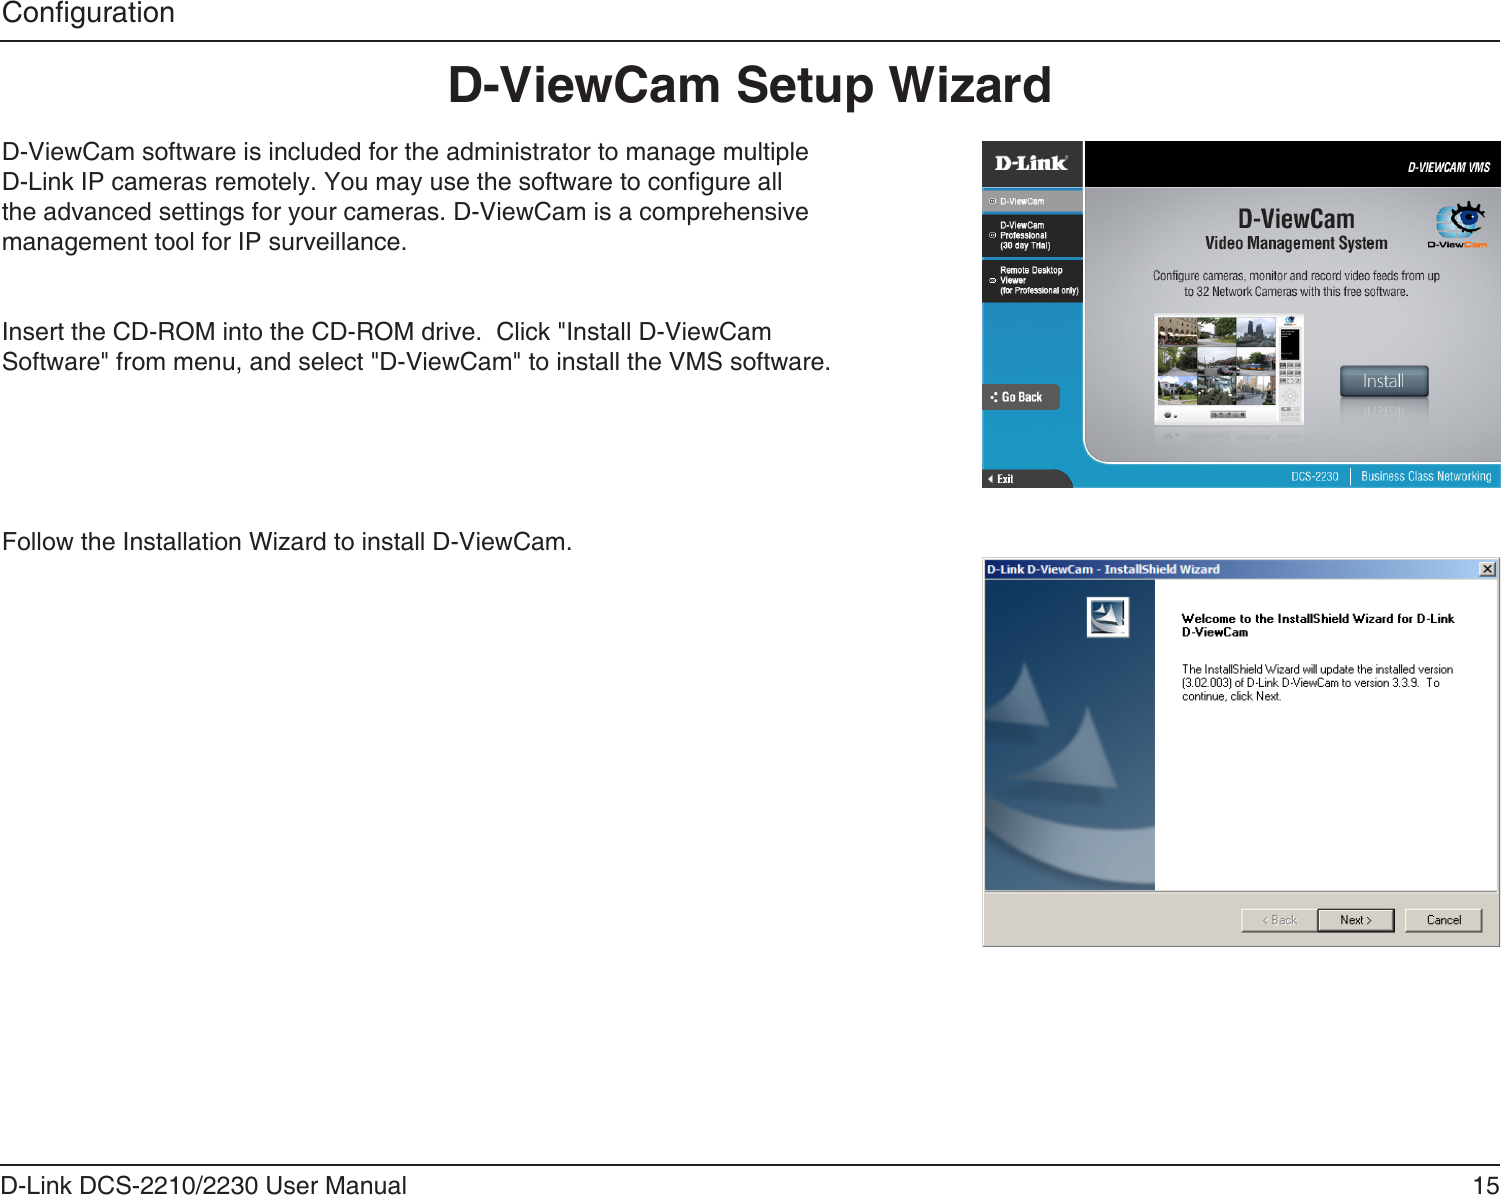 15D-Link DCS-2210/2230 User ManualCongurationD-ViewCam Setup WizardD-ViewCam software is included for the administrator to manage multiple D-Link IP cameras remotely. You may use the software to congure all the advanced settings for your cameras. D-ViewCam is a comprehensive management tool for IP surveillance.Insert the CD-ROM into the CD-ROM drive.  Click &quot;Install D-ViewCam Software&quot; from menu, and select &quot;D-ViewCam&quot; to install the VMS software.Follow the Installation Wizard to install D-ViewCam.